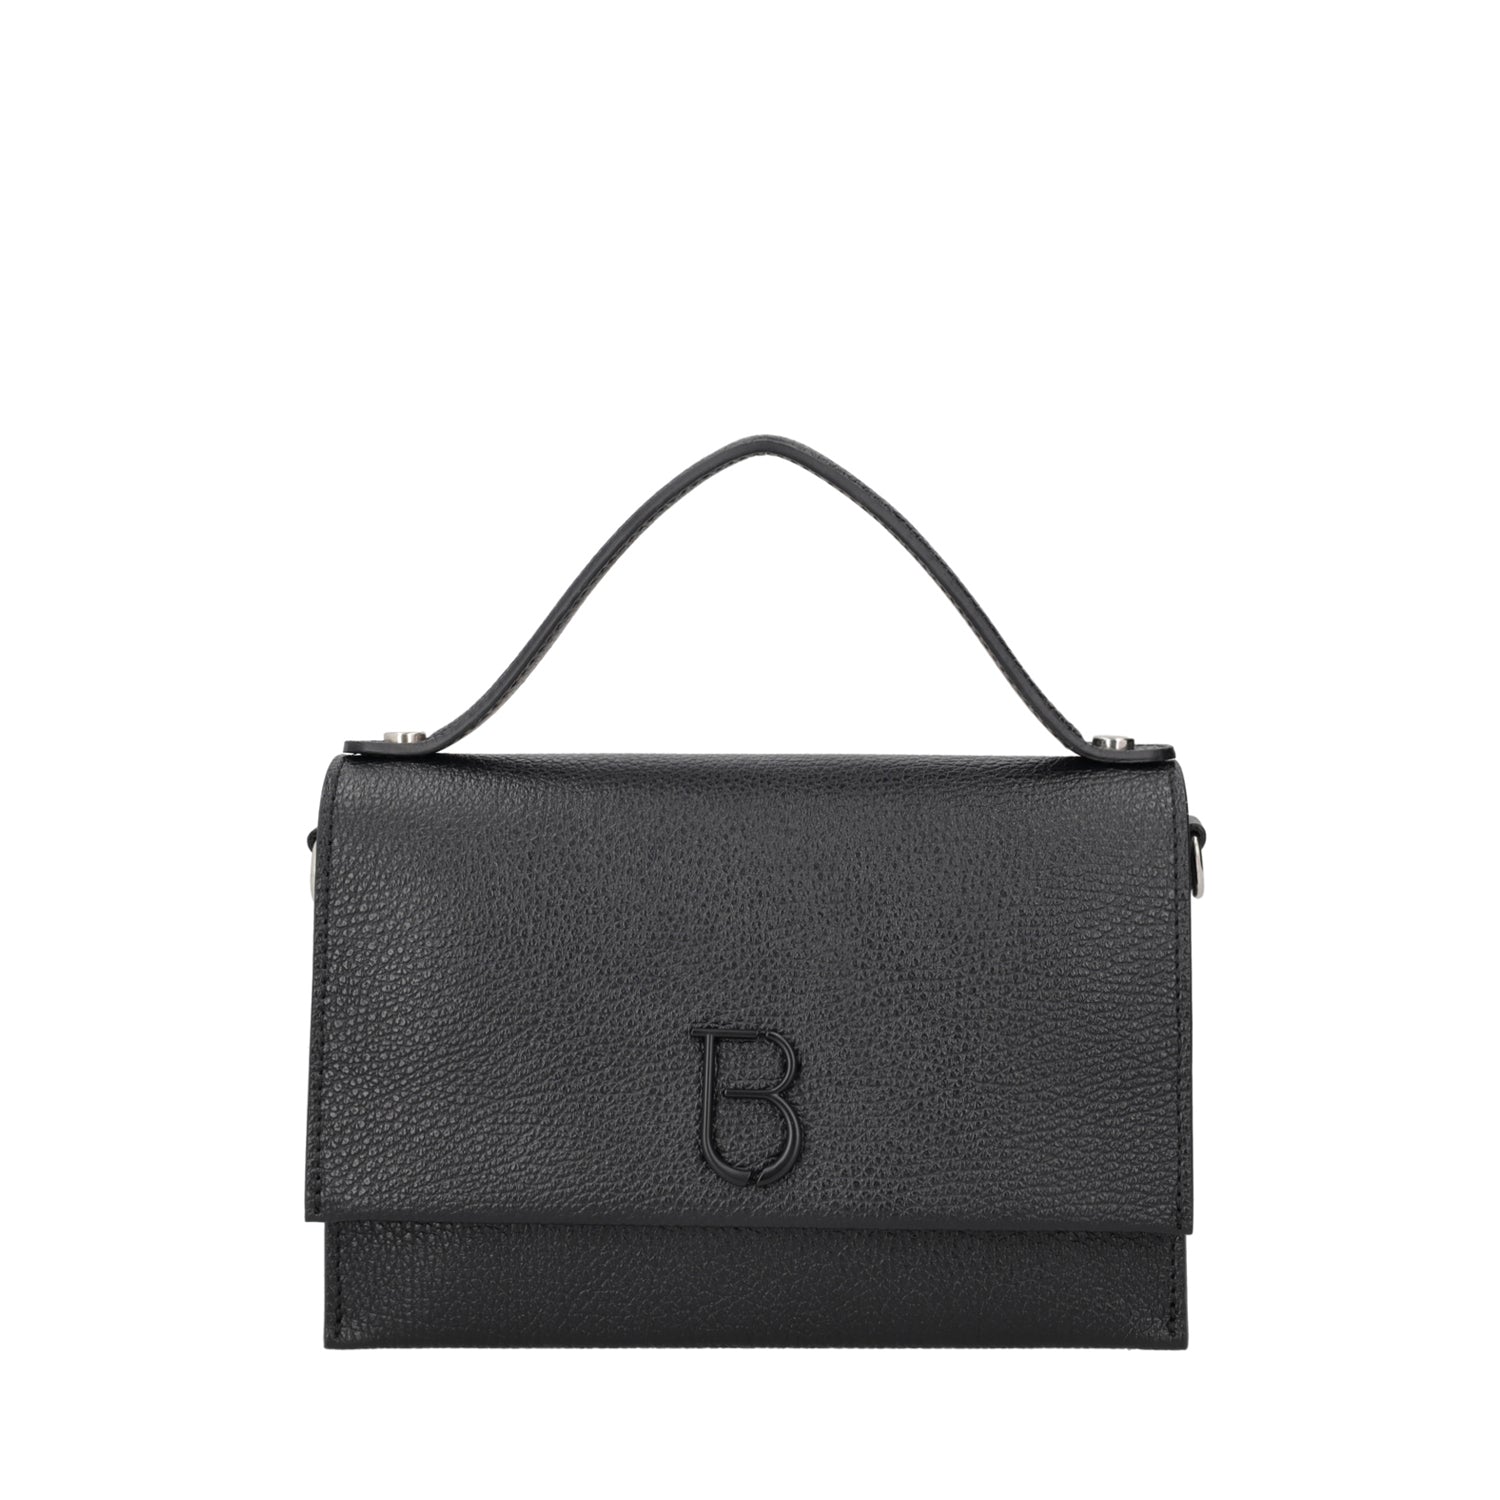 BLACK NARCISO HAND BAG IN LEATHER WITH SHOULDER STRAP